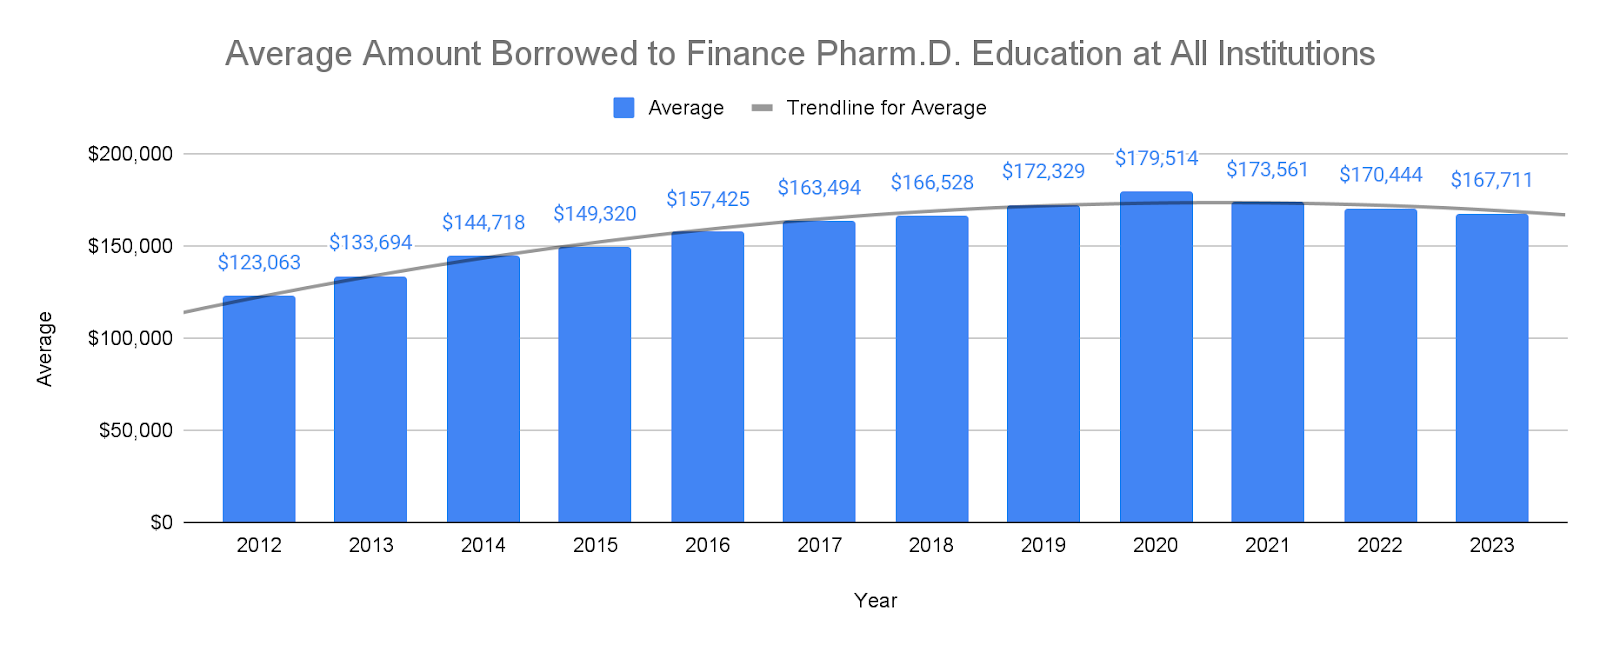 Chart showing the average amount borrowered to finance Pharm.D. education at all institutions